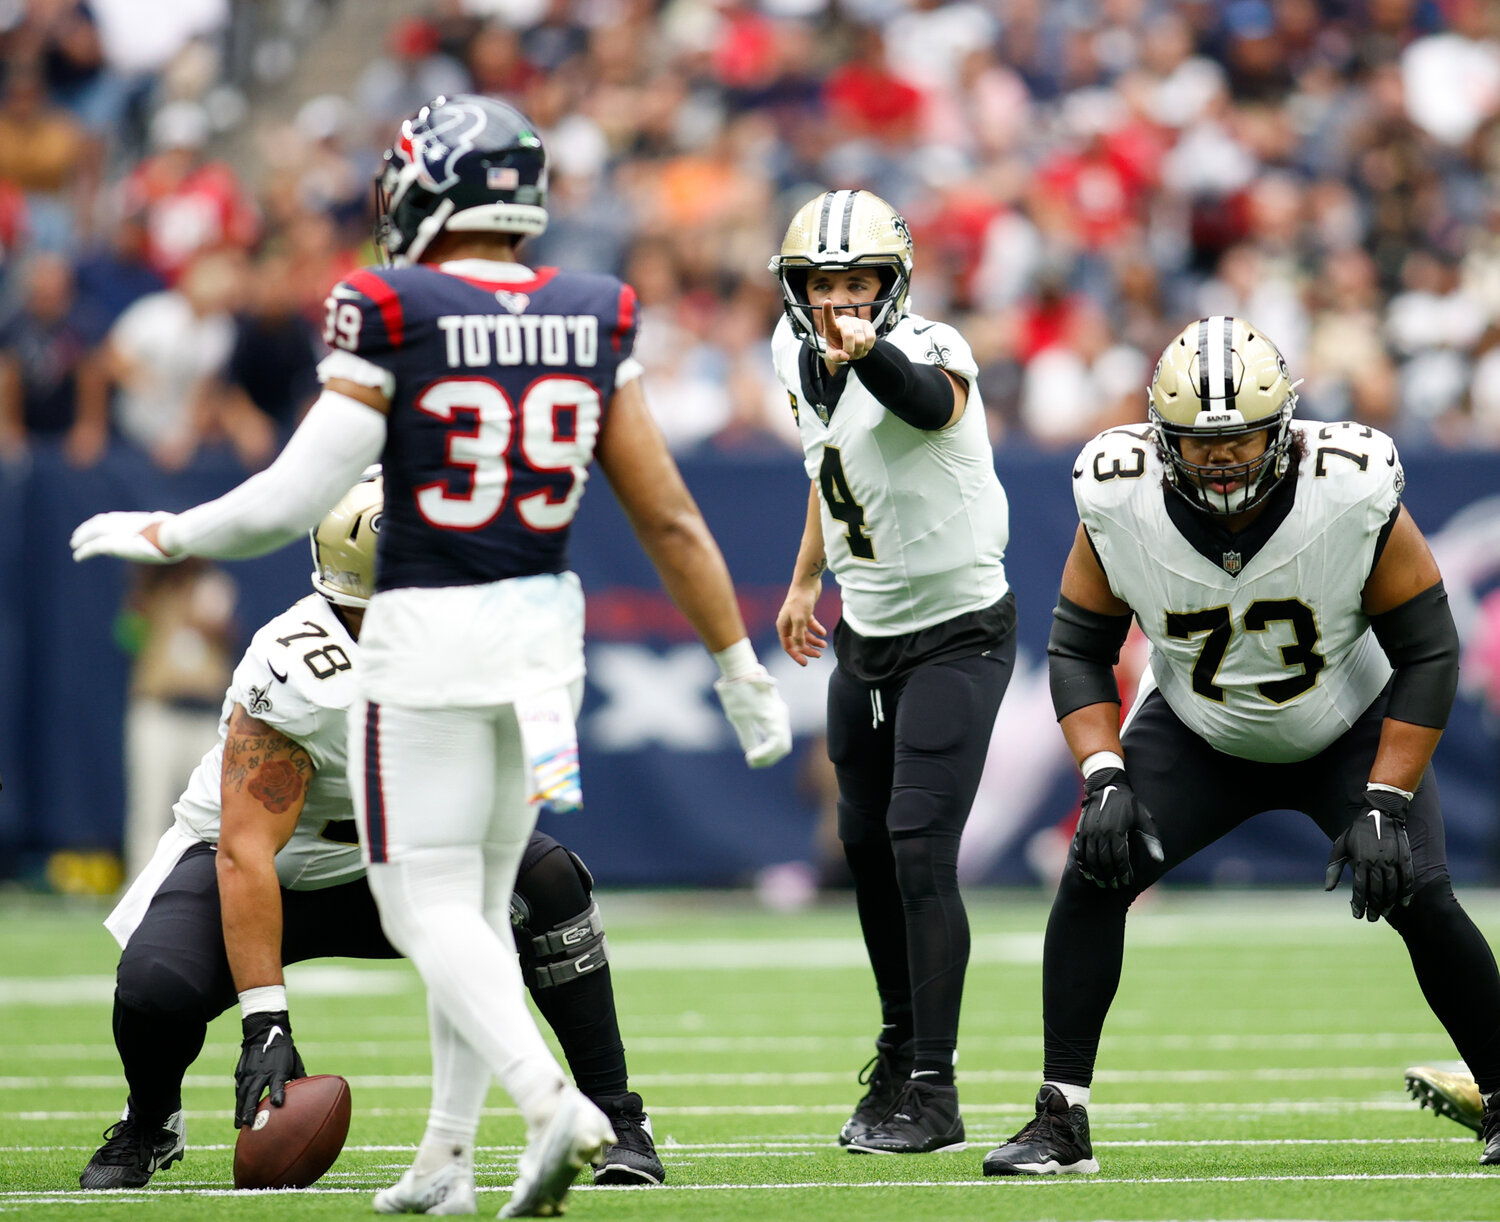 Saints quarterback Derek Carr (4) calls out defensive signals during an NFL game between the Texans and the Saints on October 15, 2023 in Houston. The Texans won, 20-13.